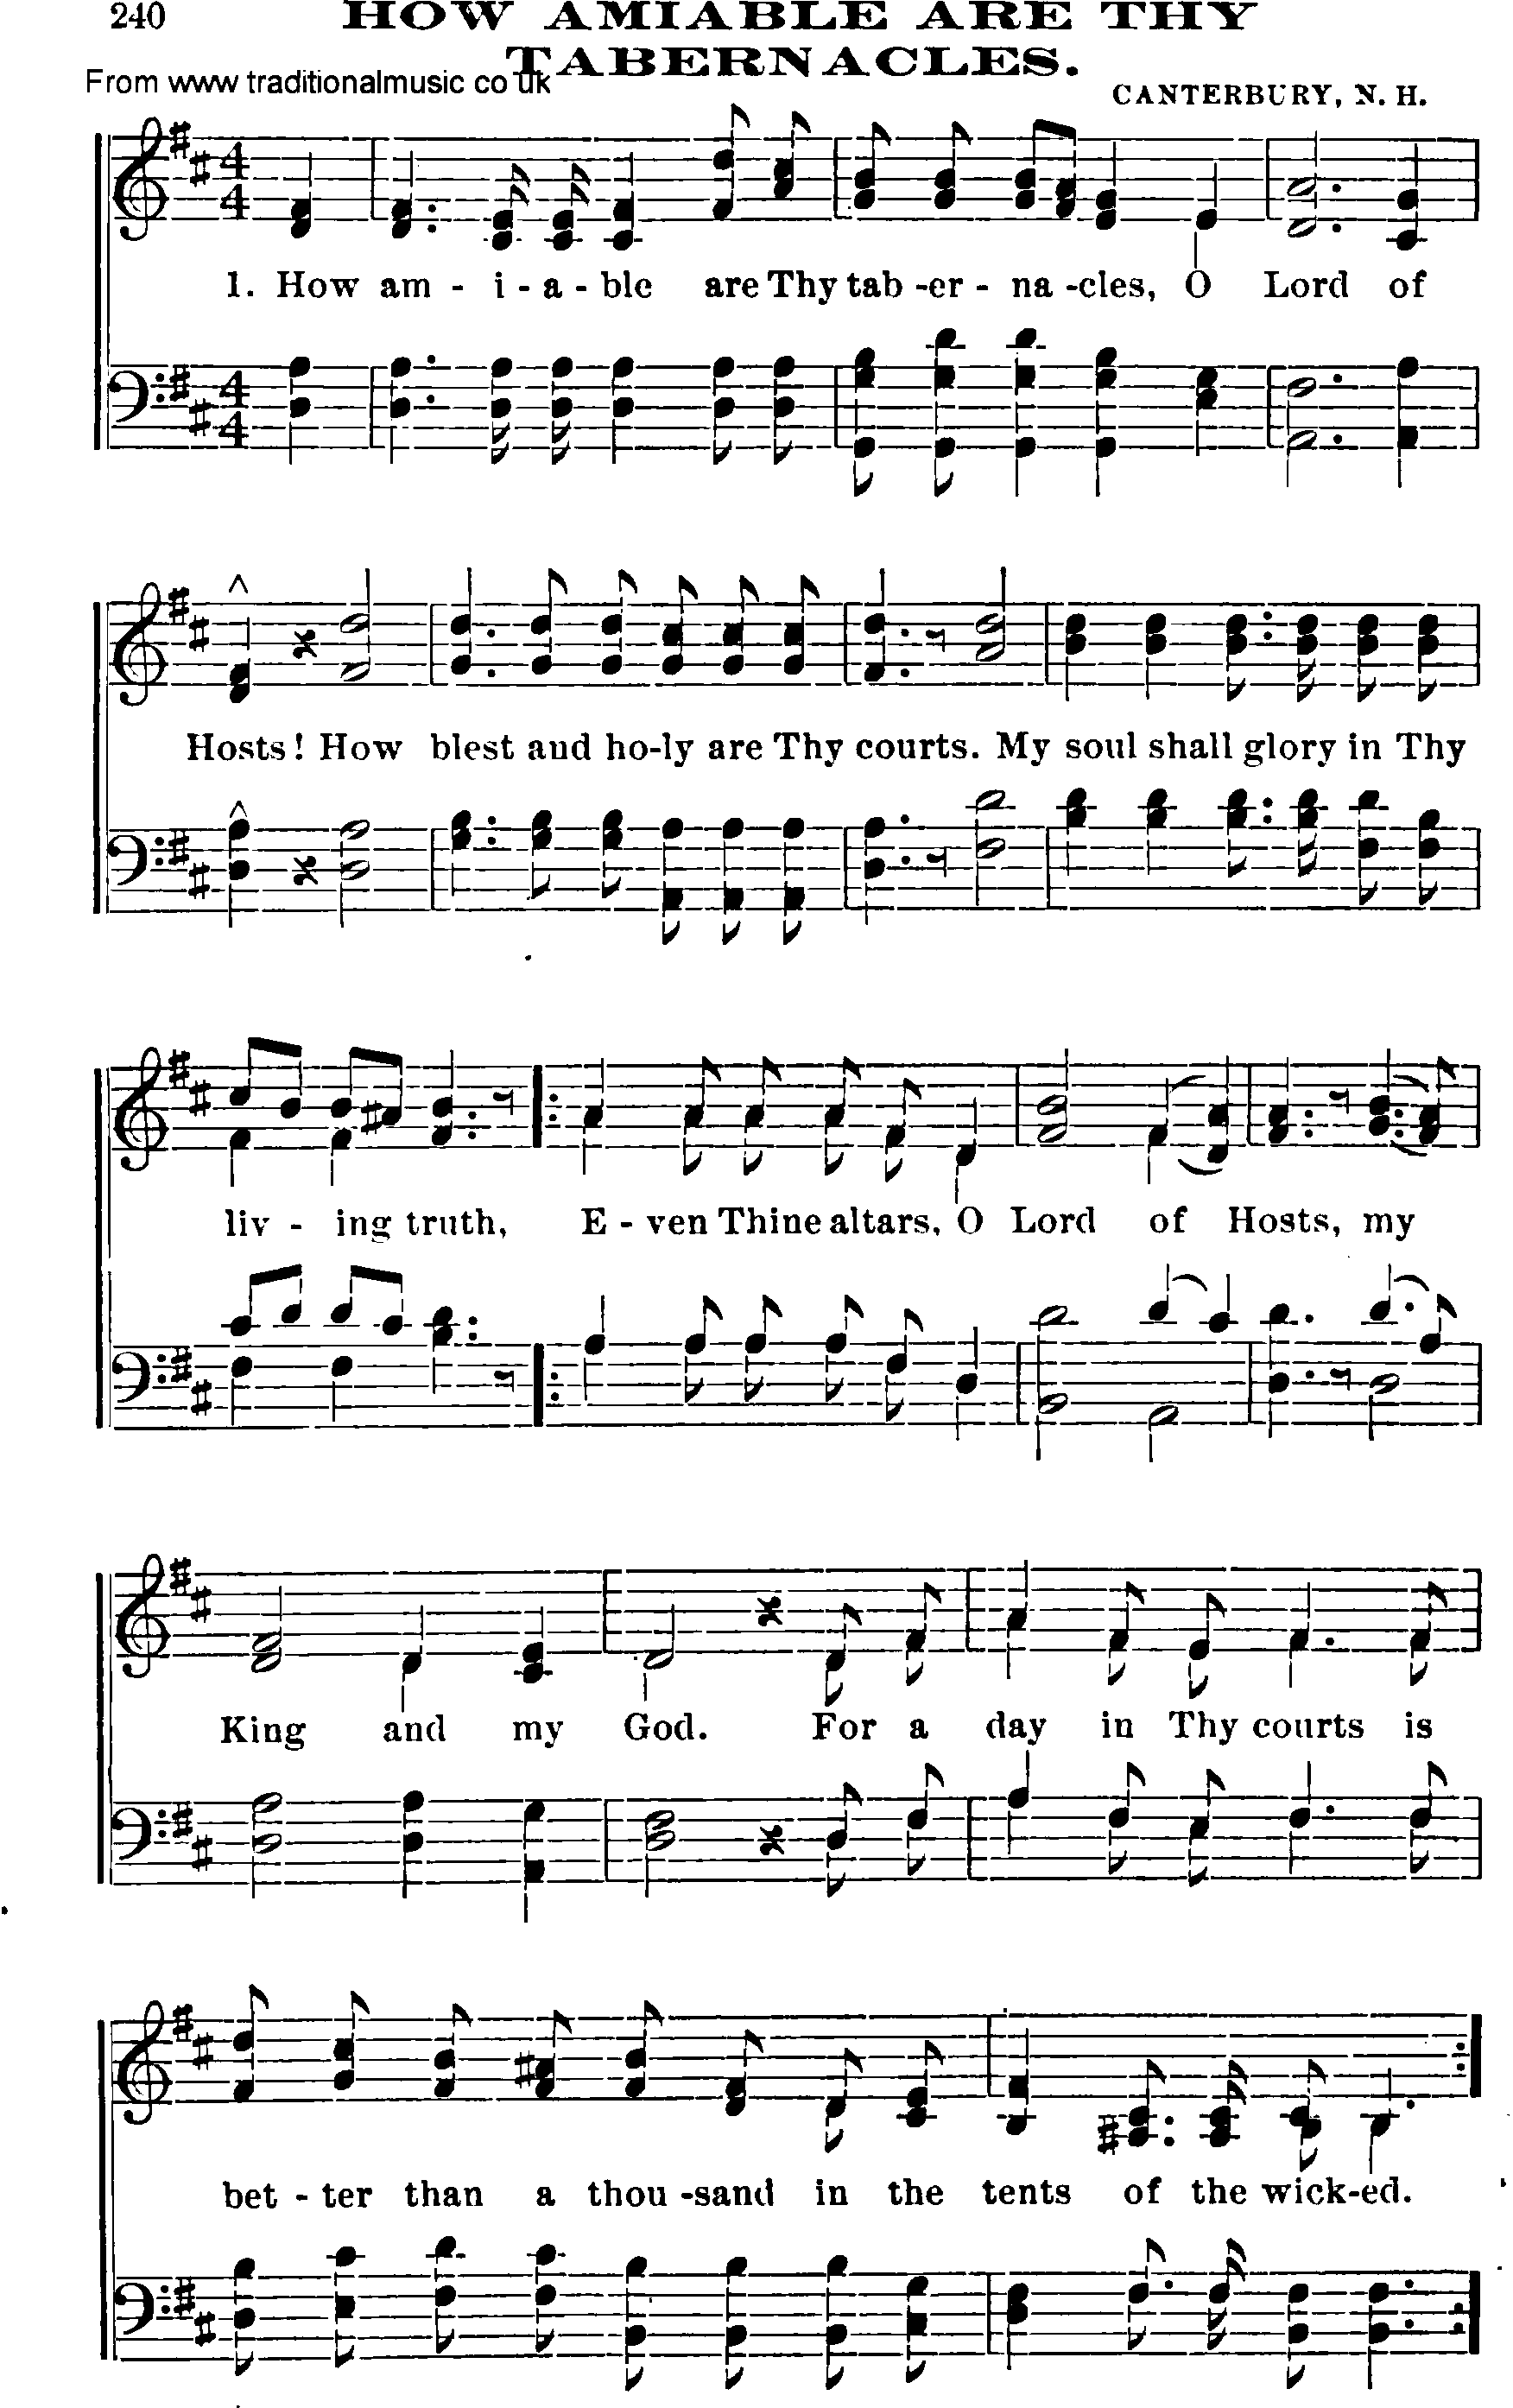 Shaker Music collection, Hymn: how amiable are thy tabernacles, sheetmusic and PDF